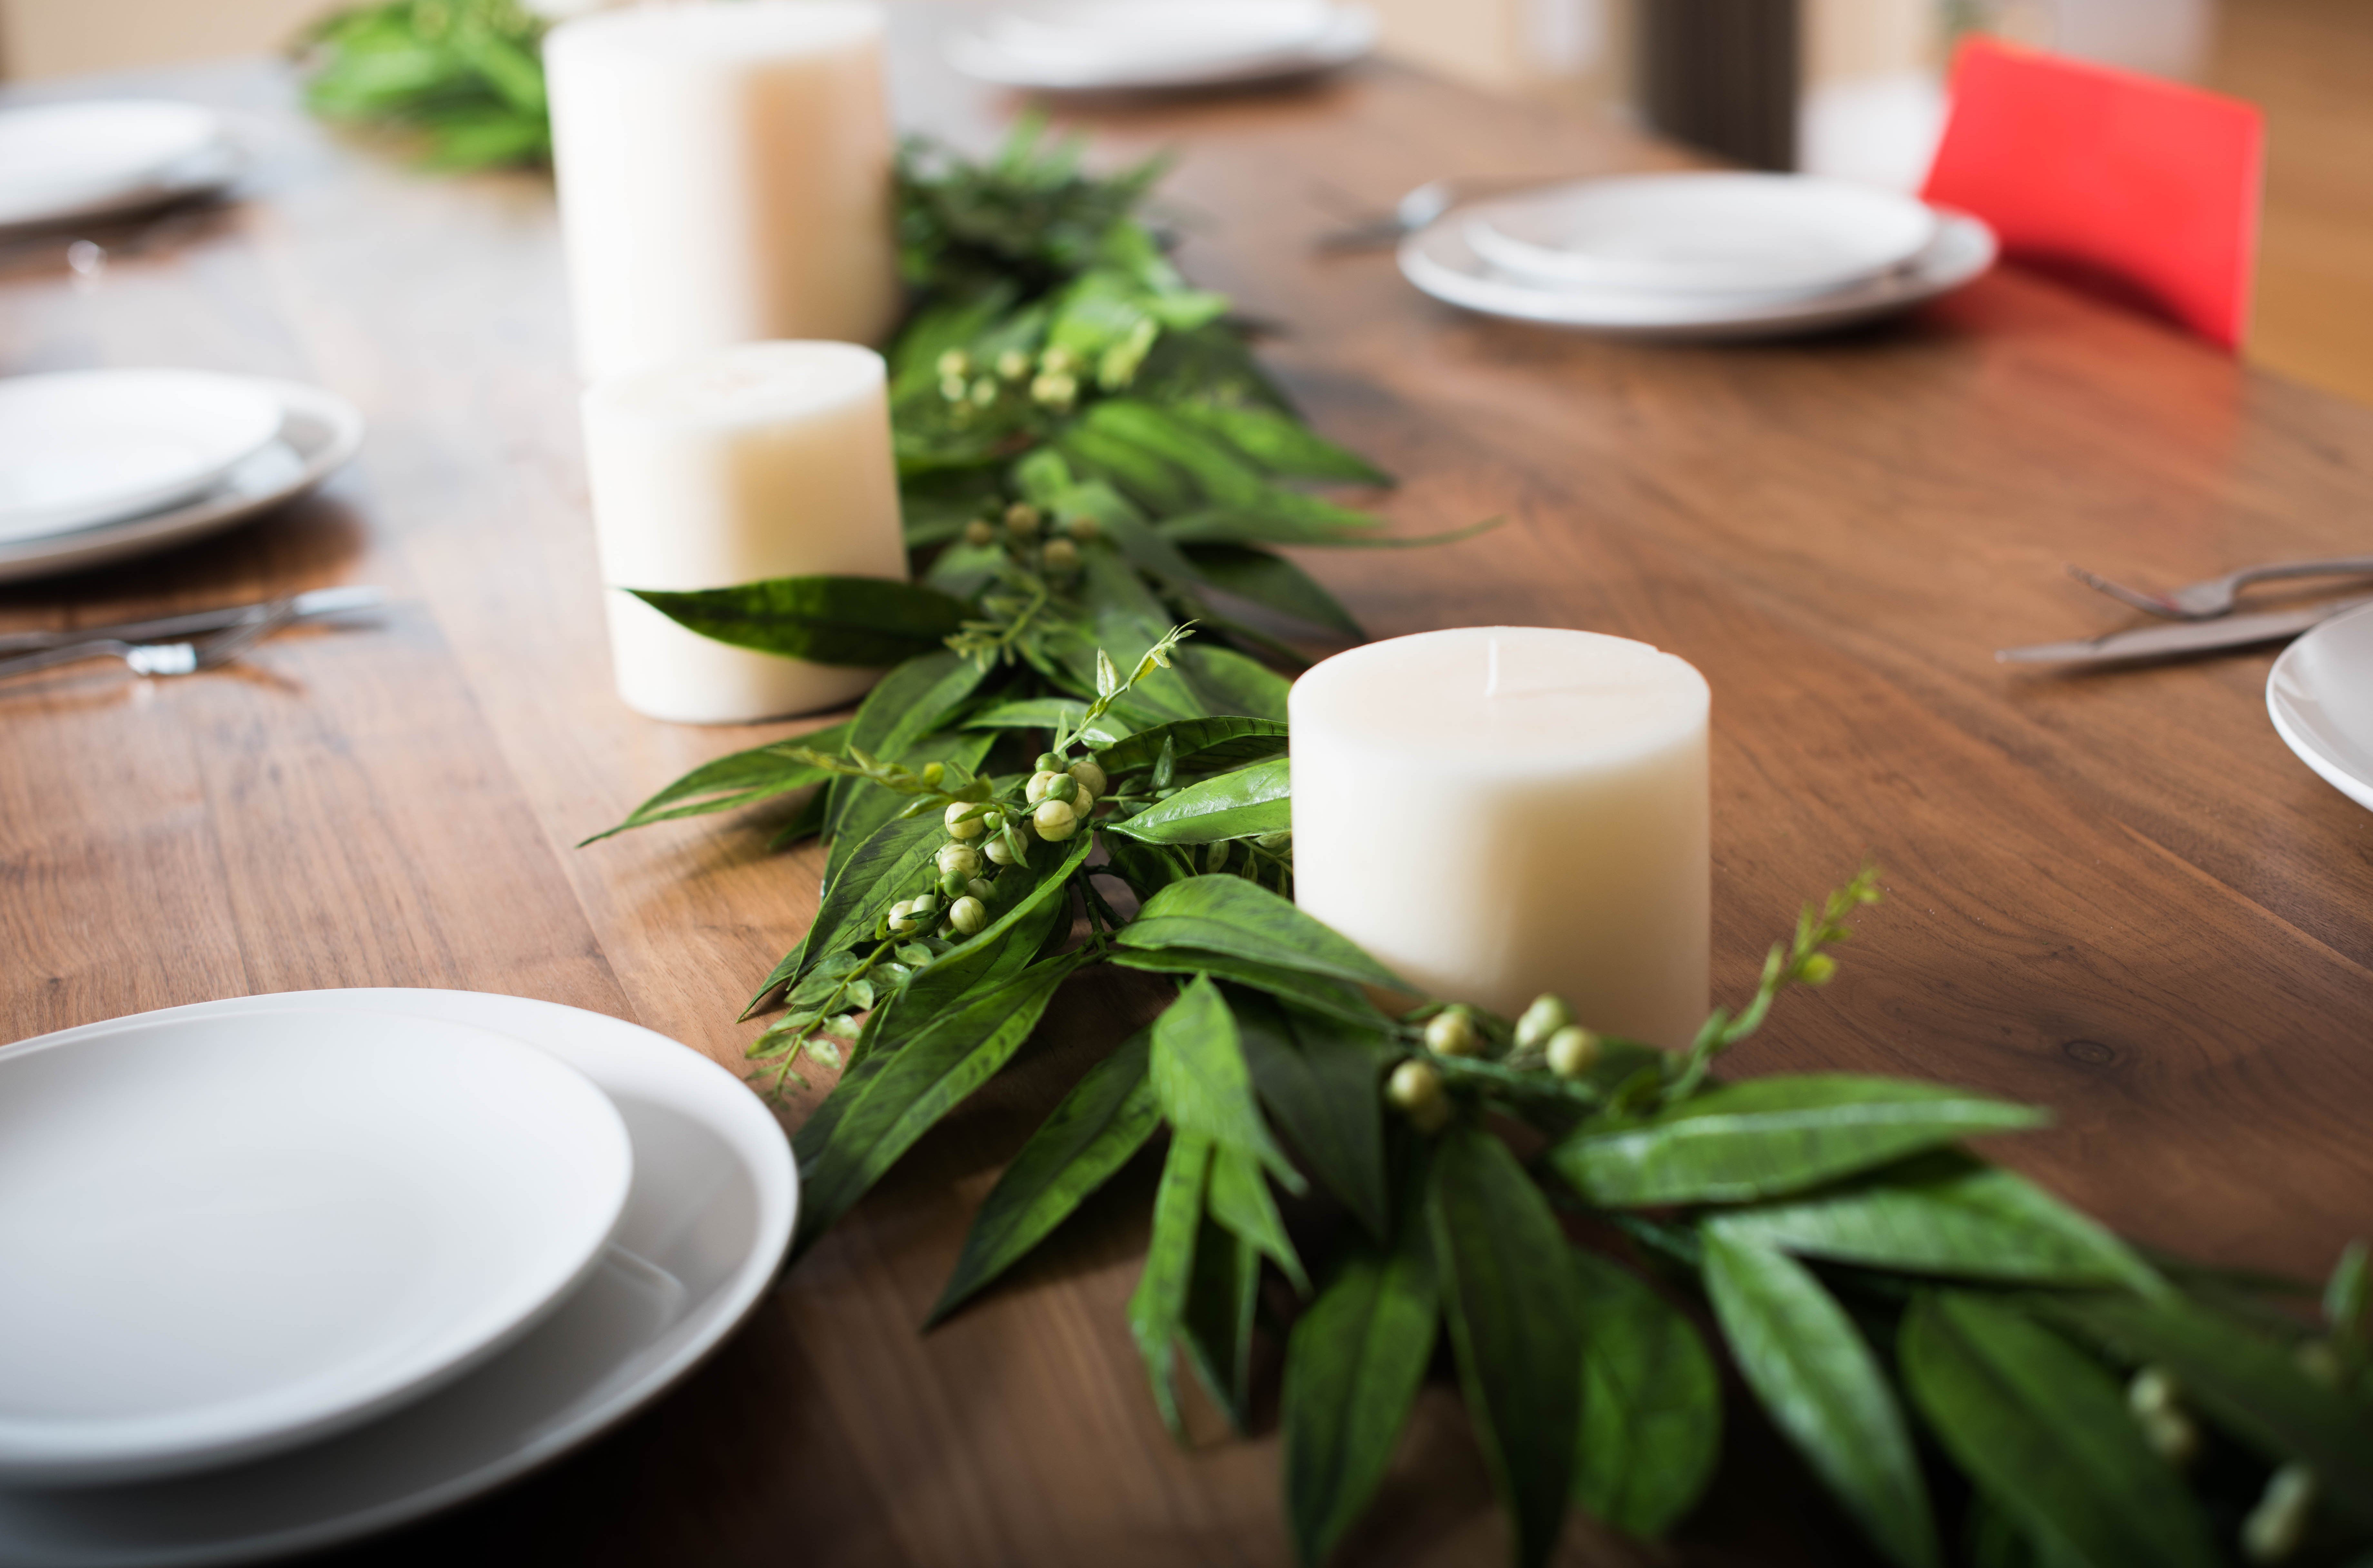 Cream unlit candles sit with green garland with green berries on wood table next to place settings